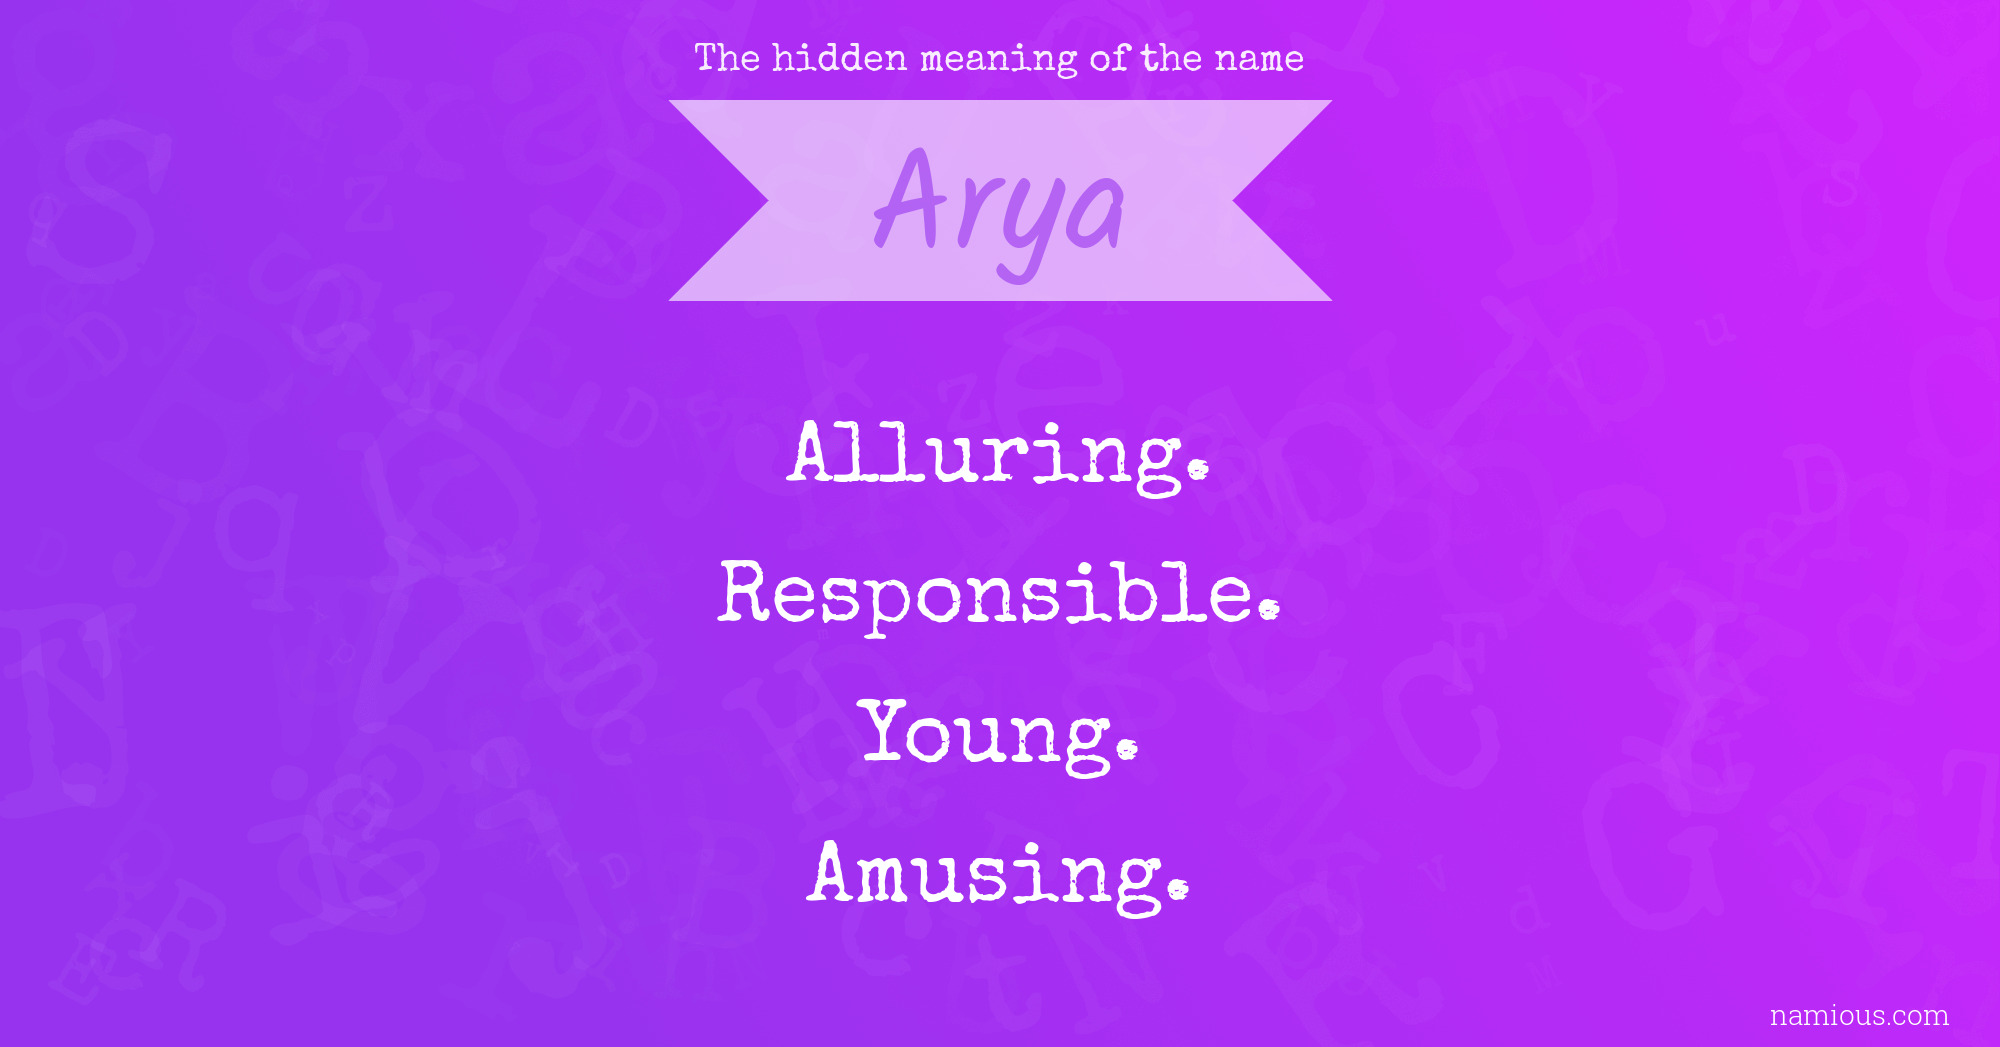 The hidden meaning of the name Arya